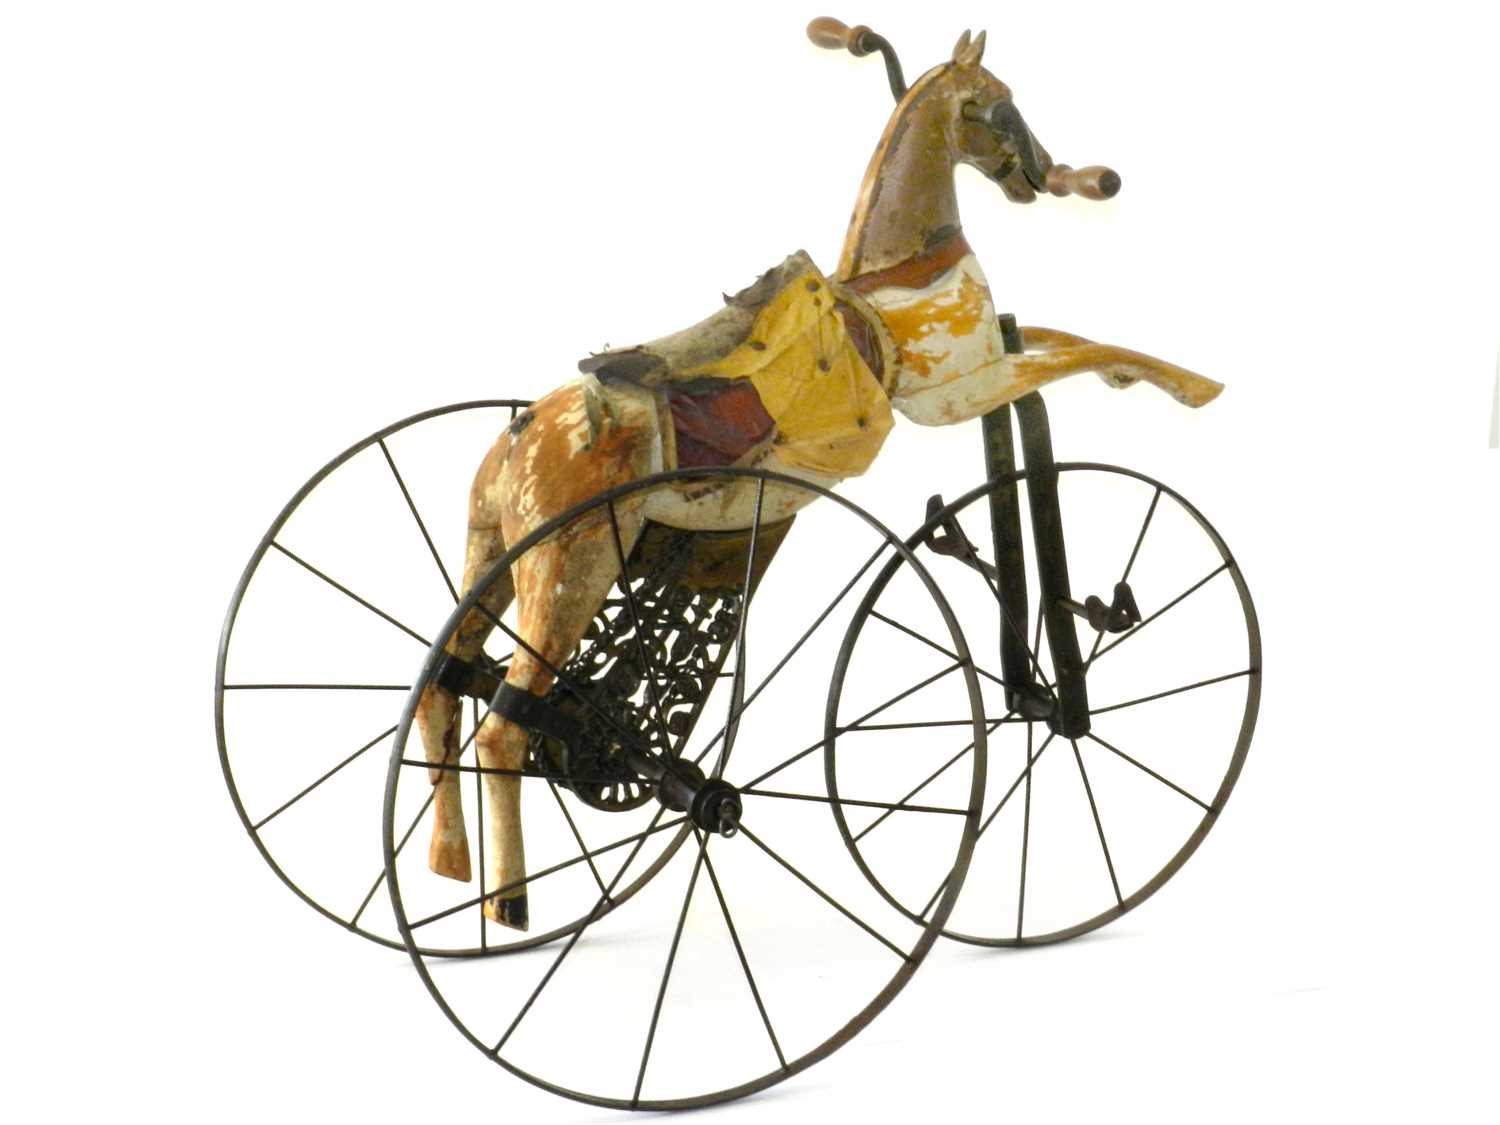 Antique French Velocipede Toy Horse Tricycle c.1870 - Image 2 of 3